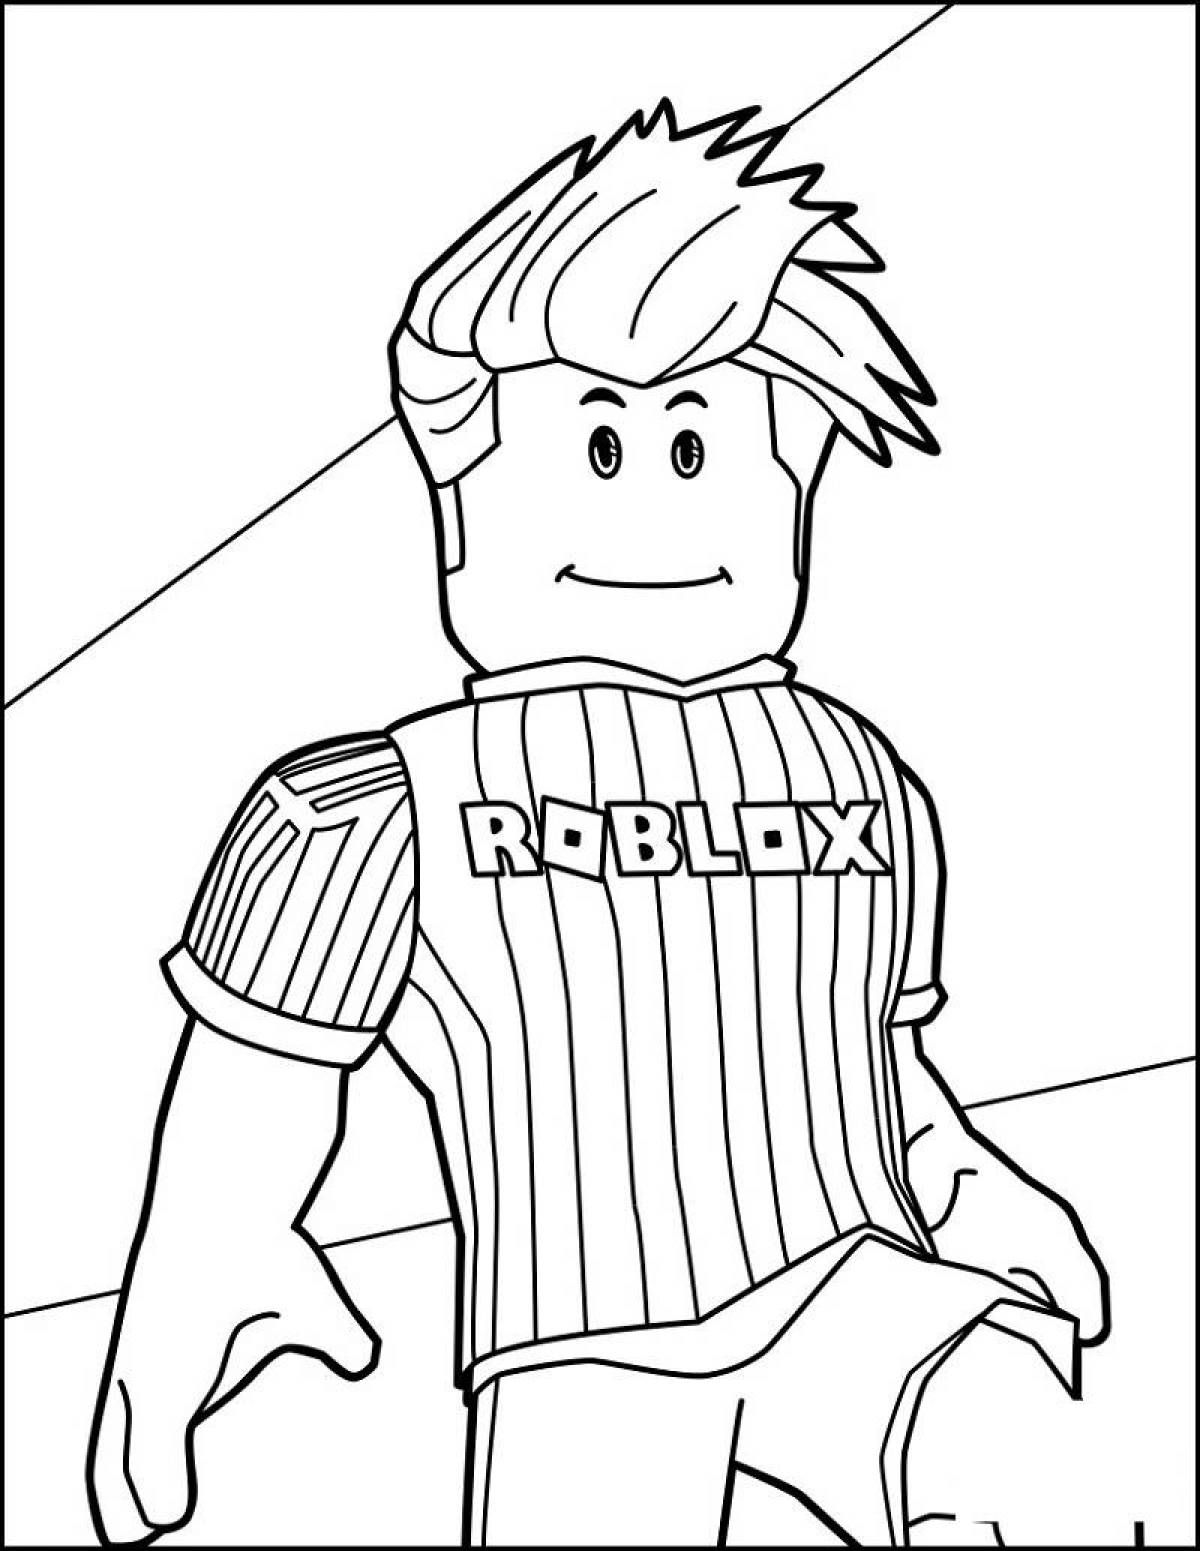 Colorful roblox coloring book for babies